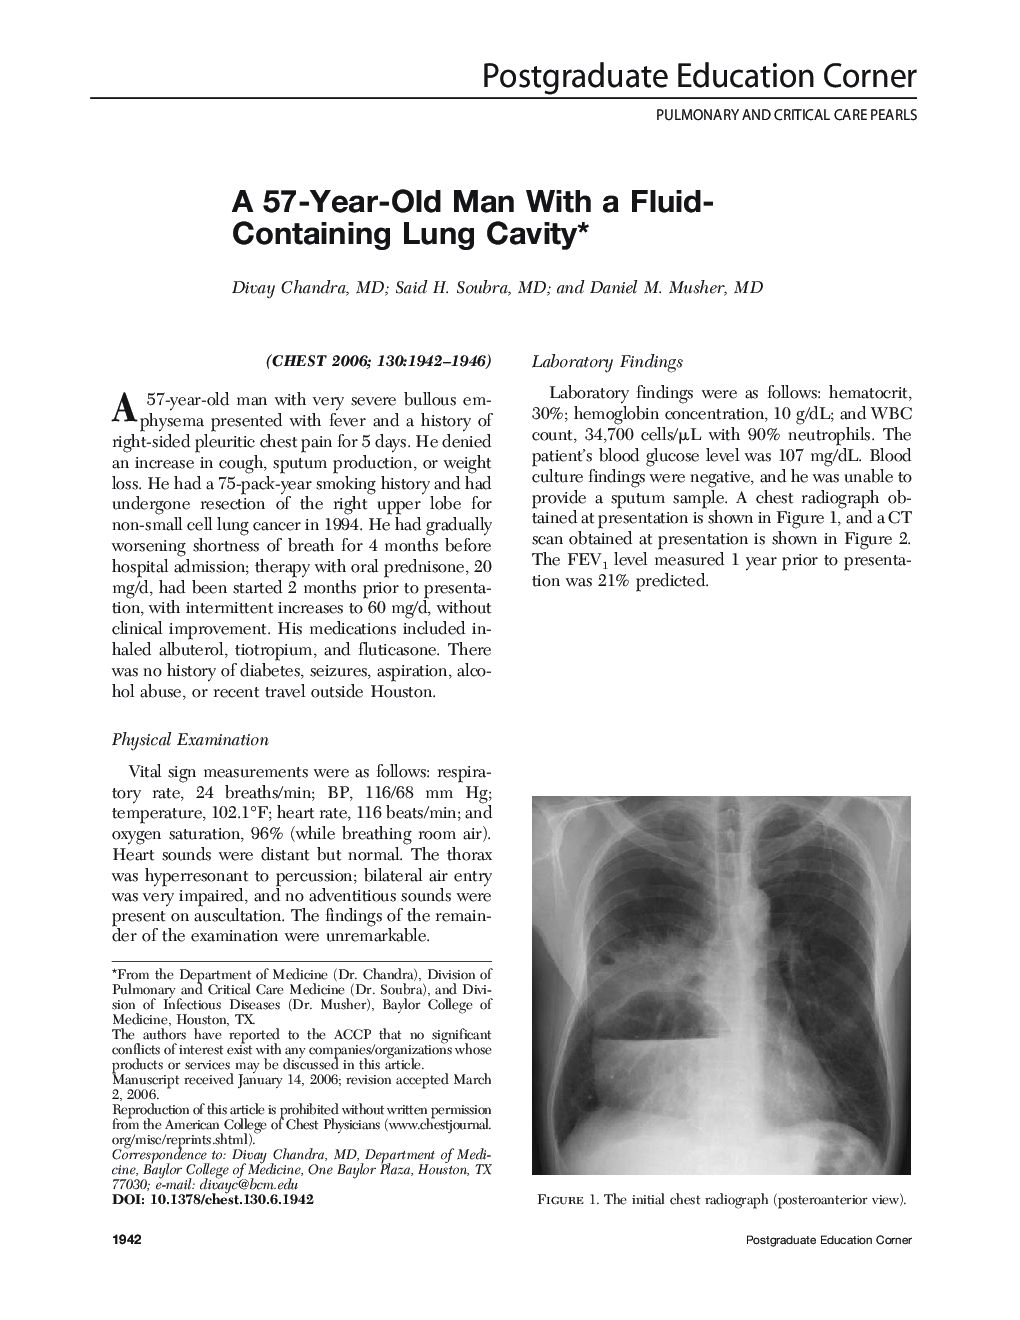 A 57-Year-Old Man With a Fluid-Containing Lung Cavity